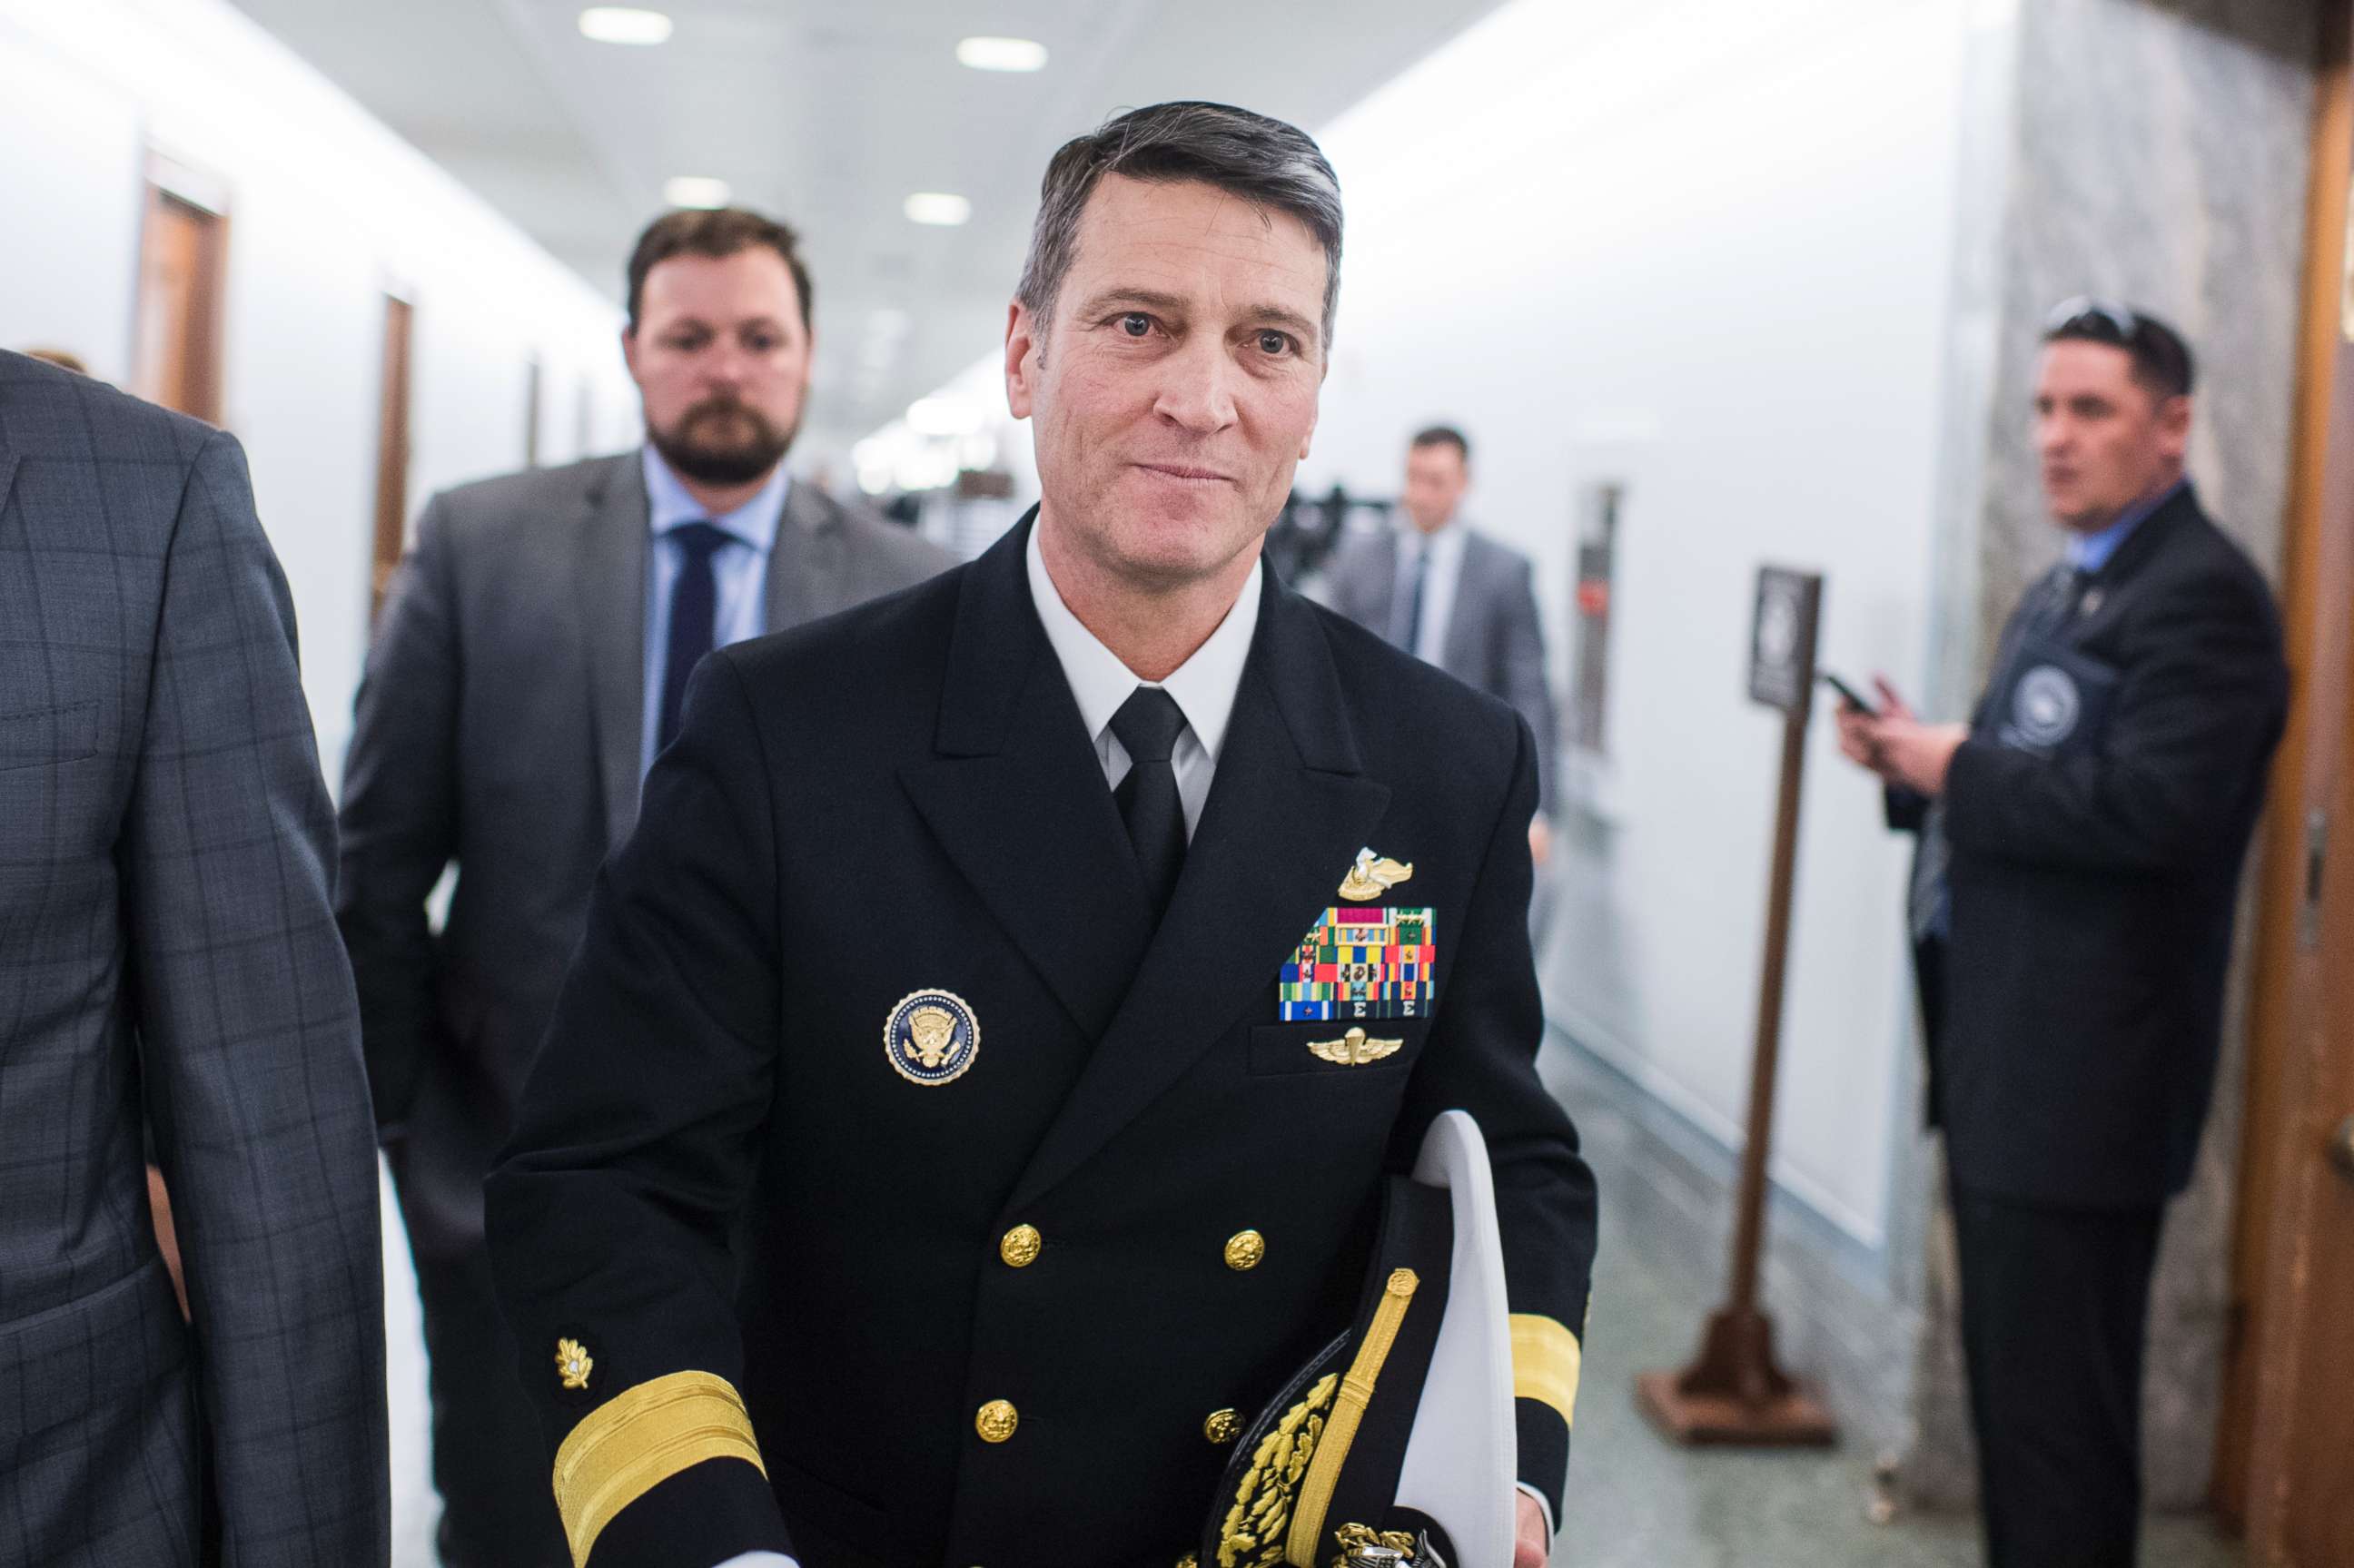 PHOTO: Rear Adm. Ronny Jackson, leaves Dirksen Building after a meeting on Capitol Hill with Sen. Jerry Moran, on April 24, 2018.